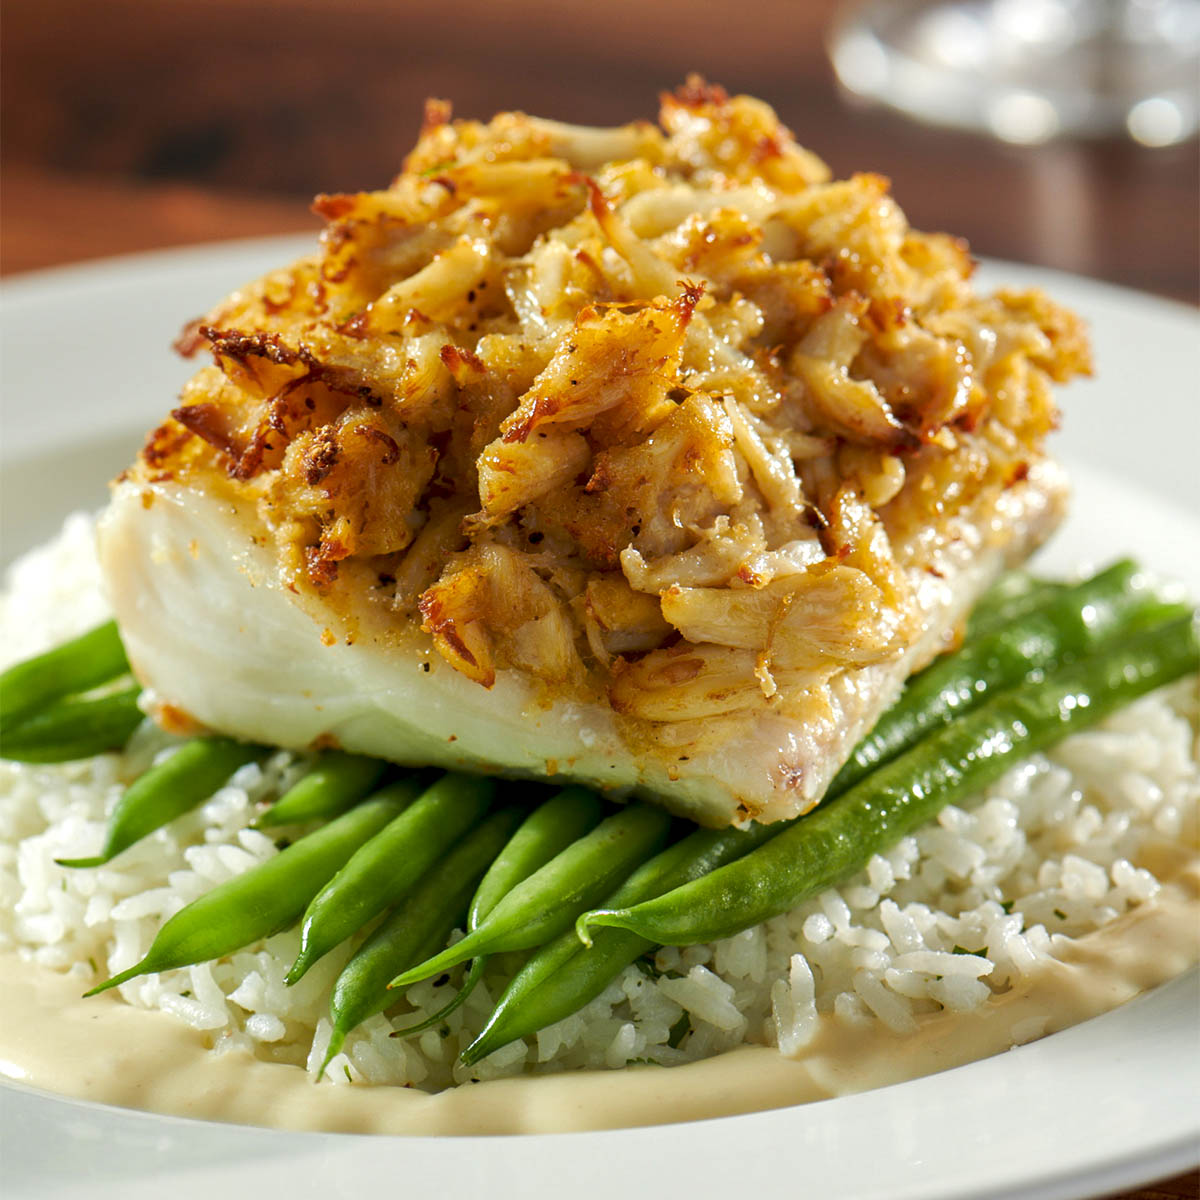 Burtons crab crusted haddock atop fresh green beans and fluffy rice at their Boca Raton location